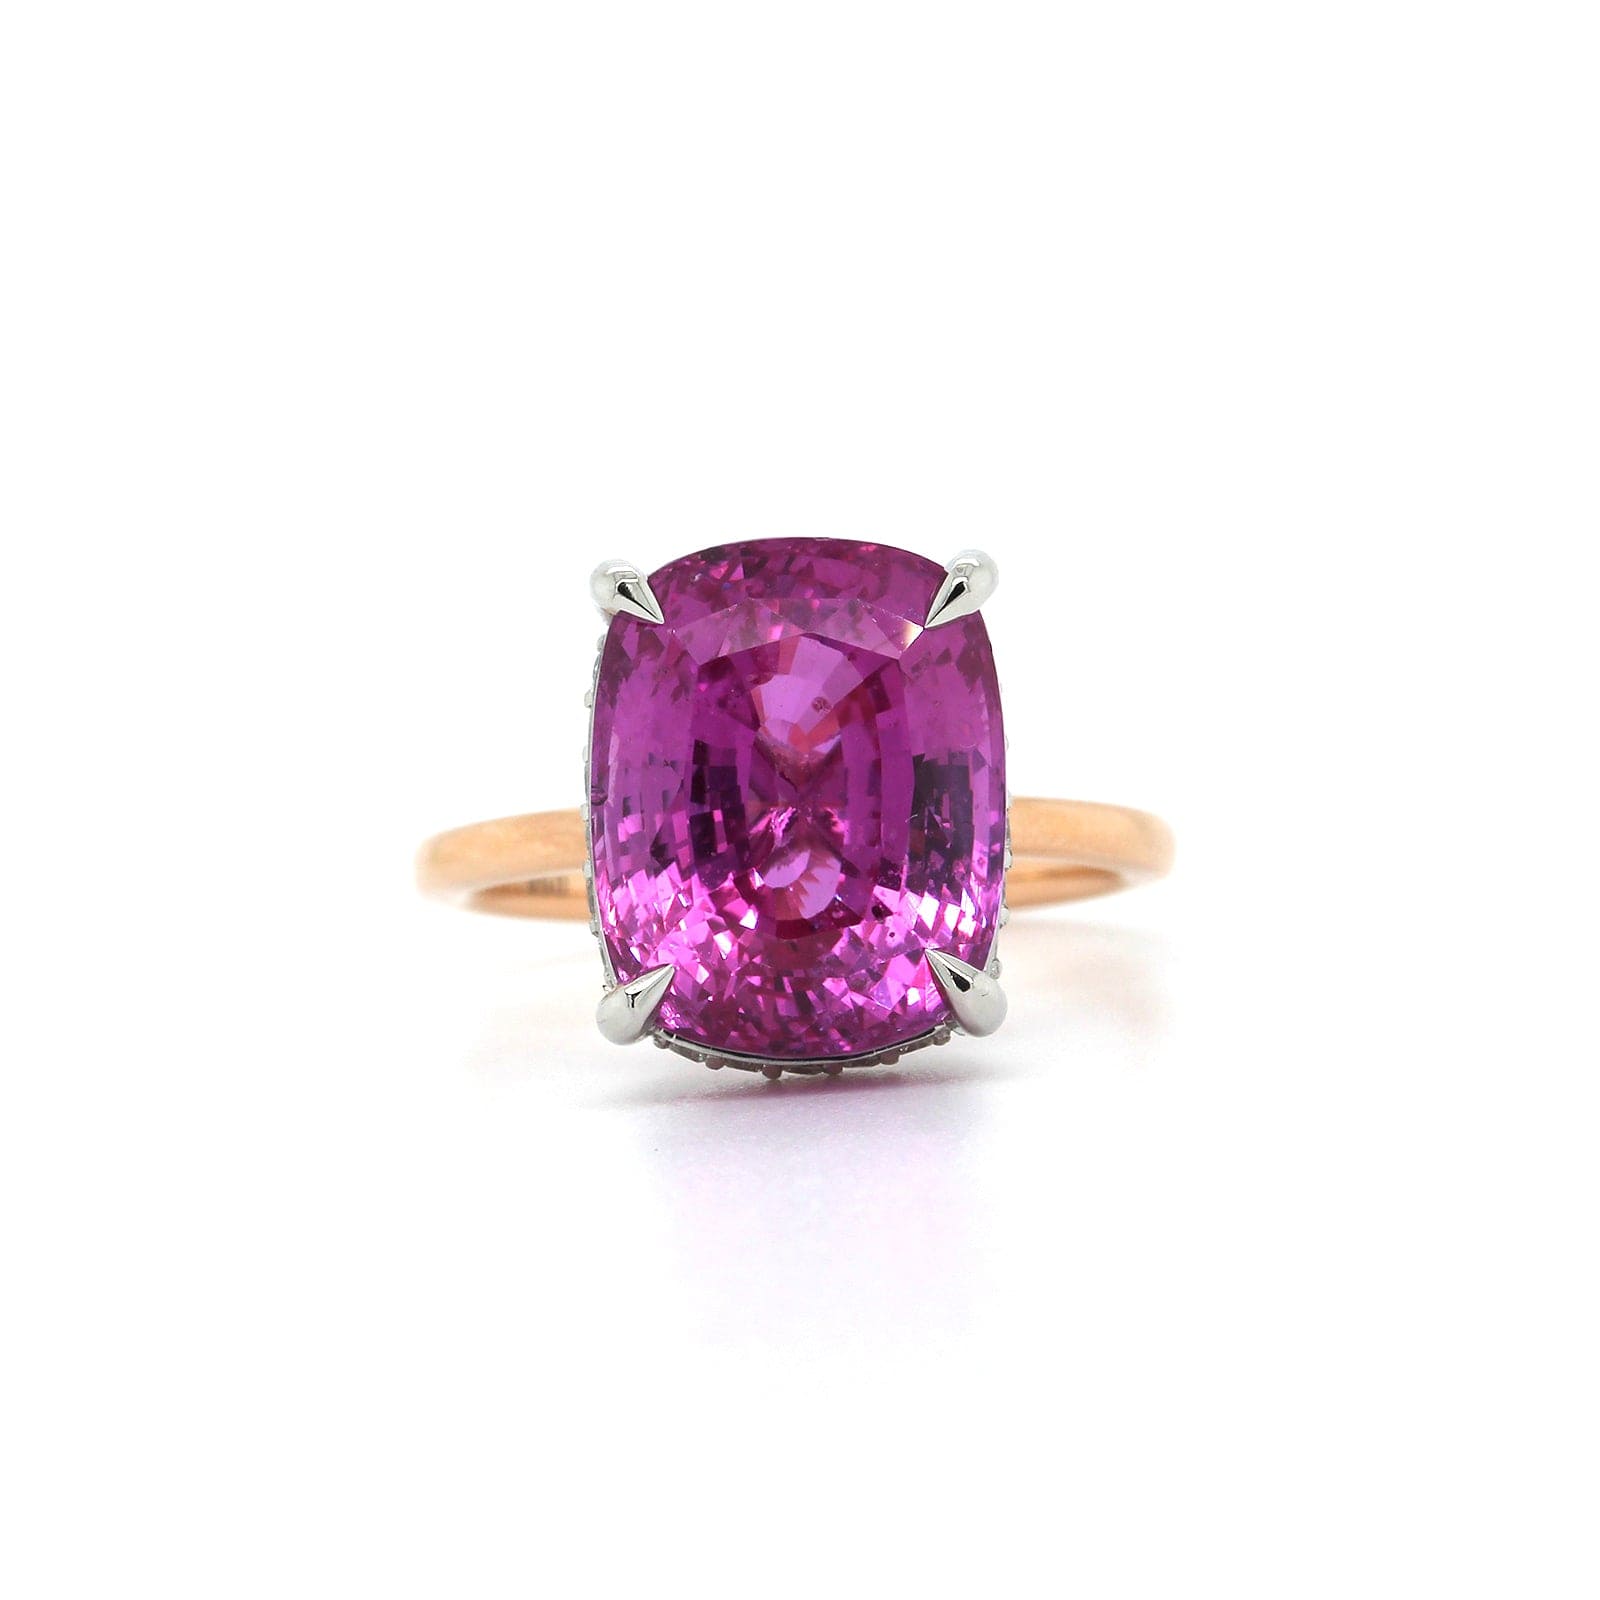 20K Rose Gold and Platinum Pink Sapphire and Diamond Ring